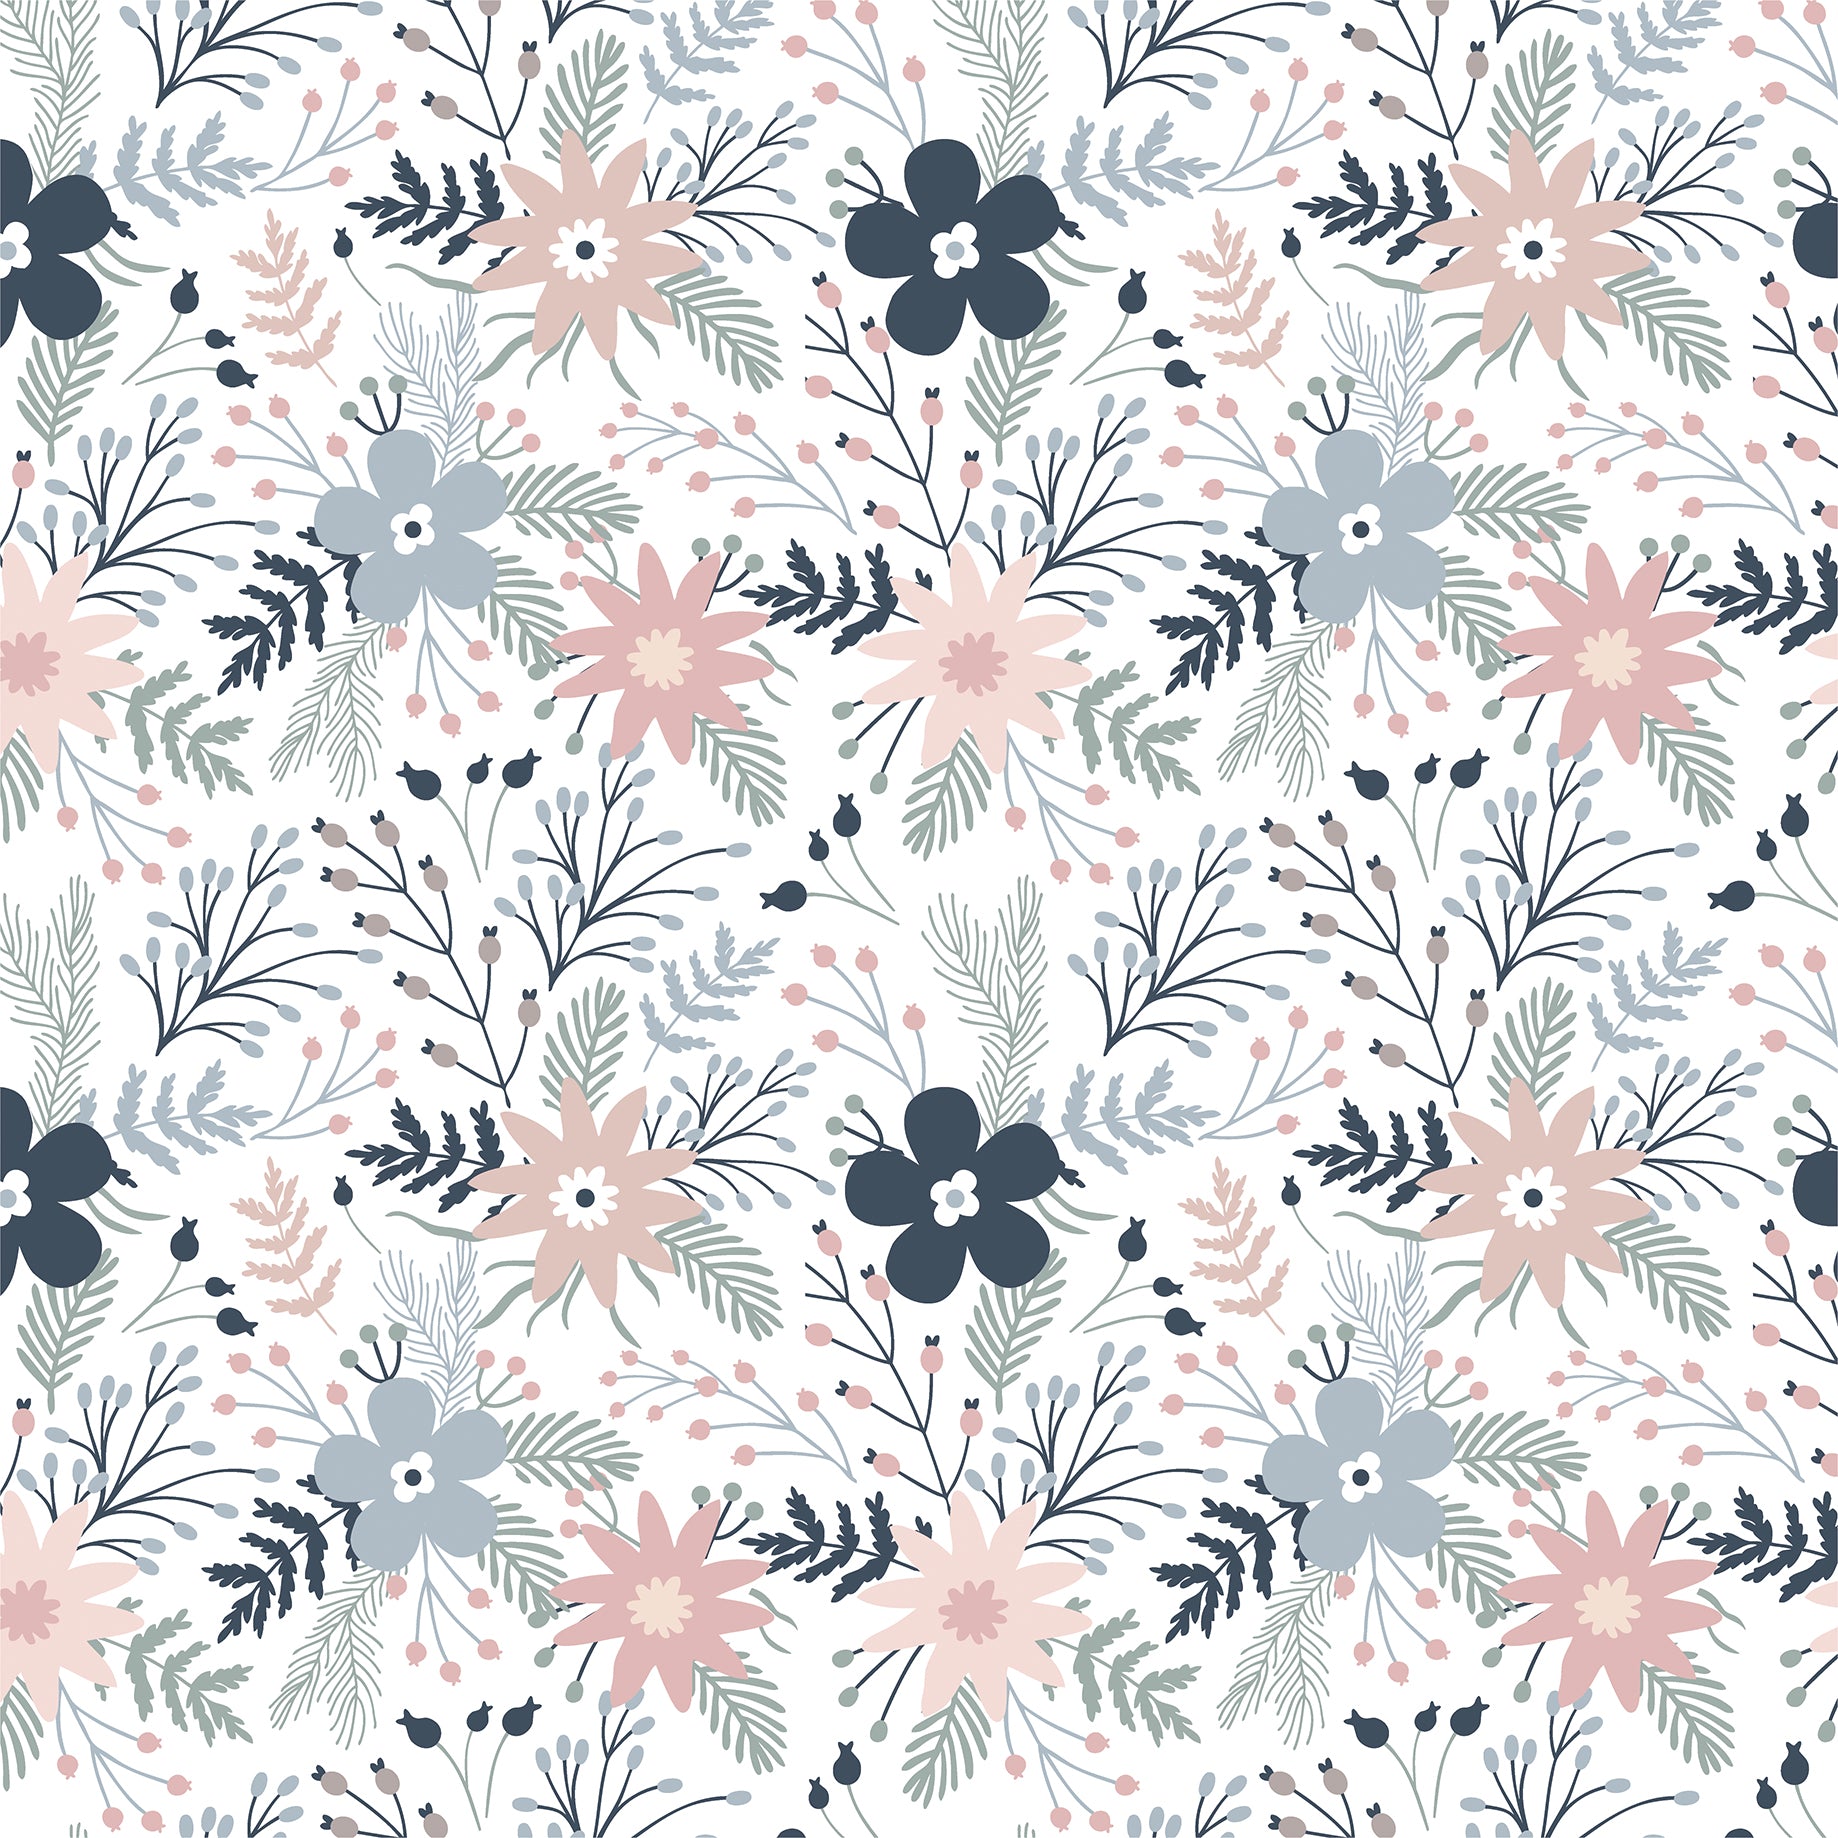 Winterland Collection Winterland Floral 12 x 12 Double-Sided Scrapbook Paper by Echo Park Paper